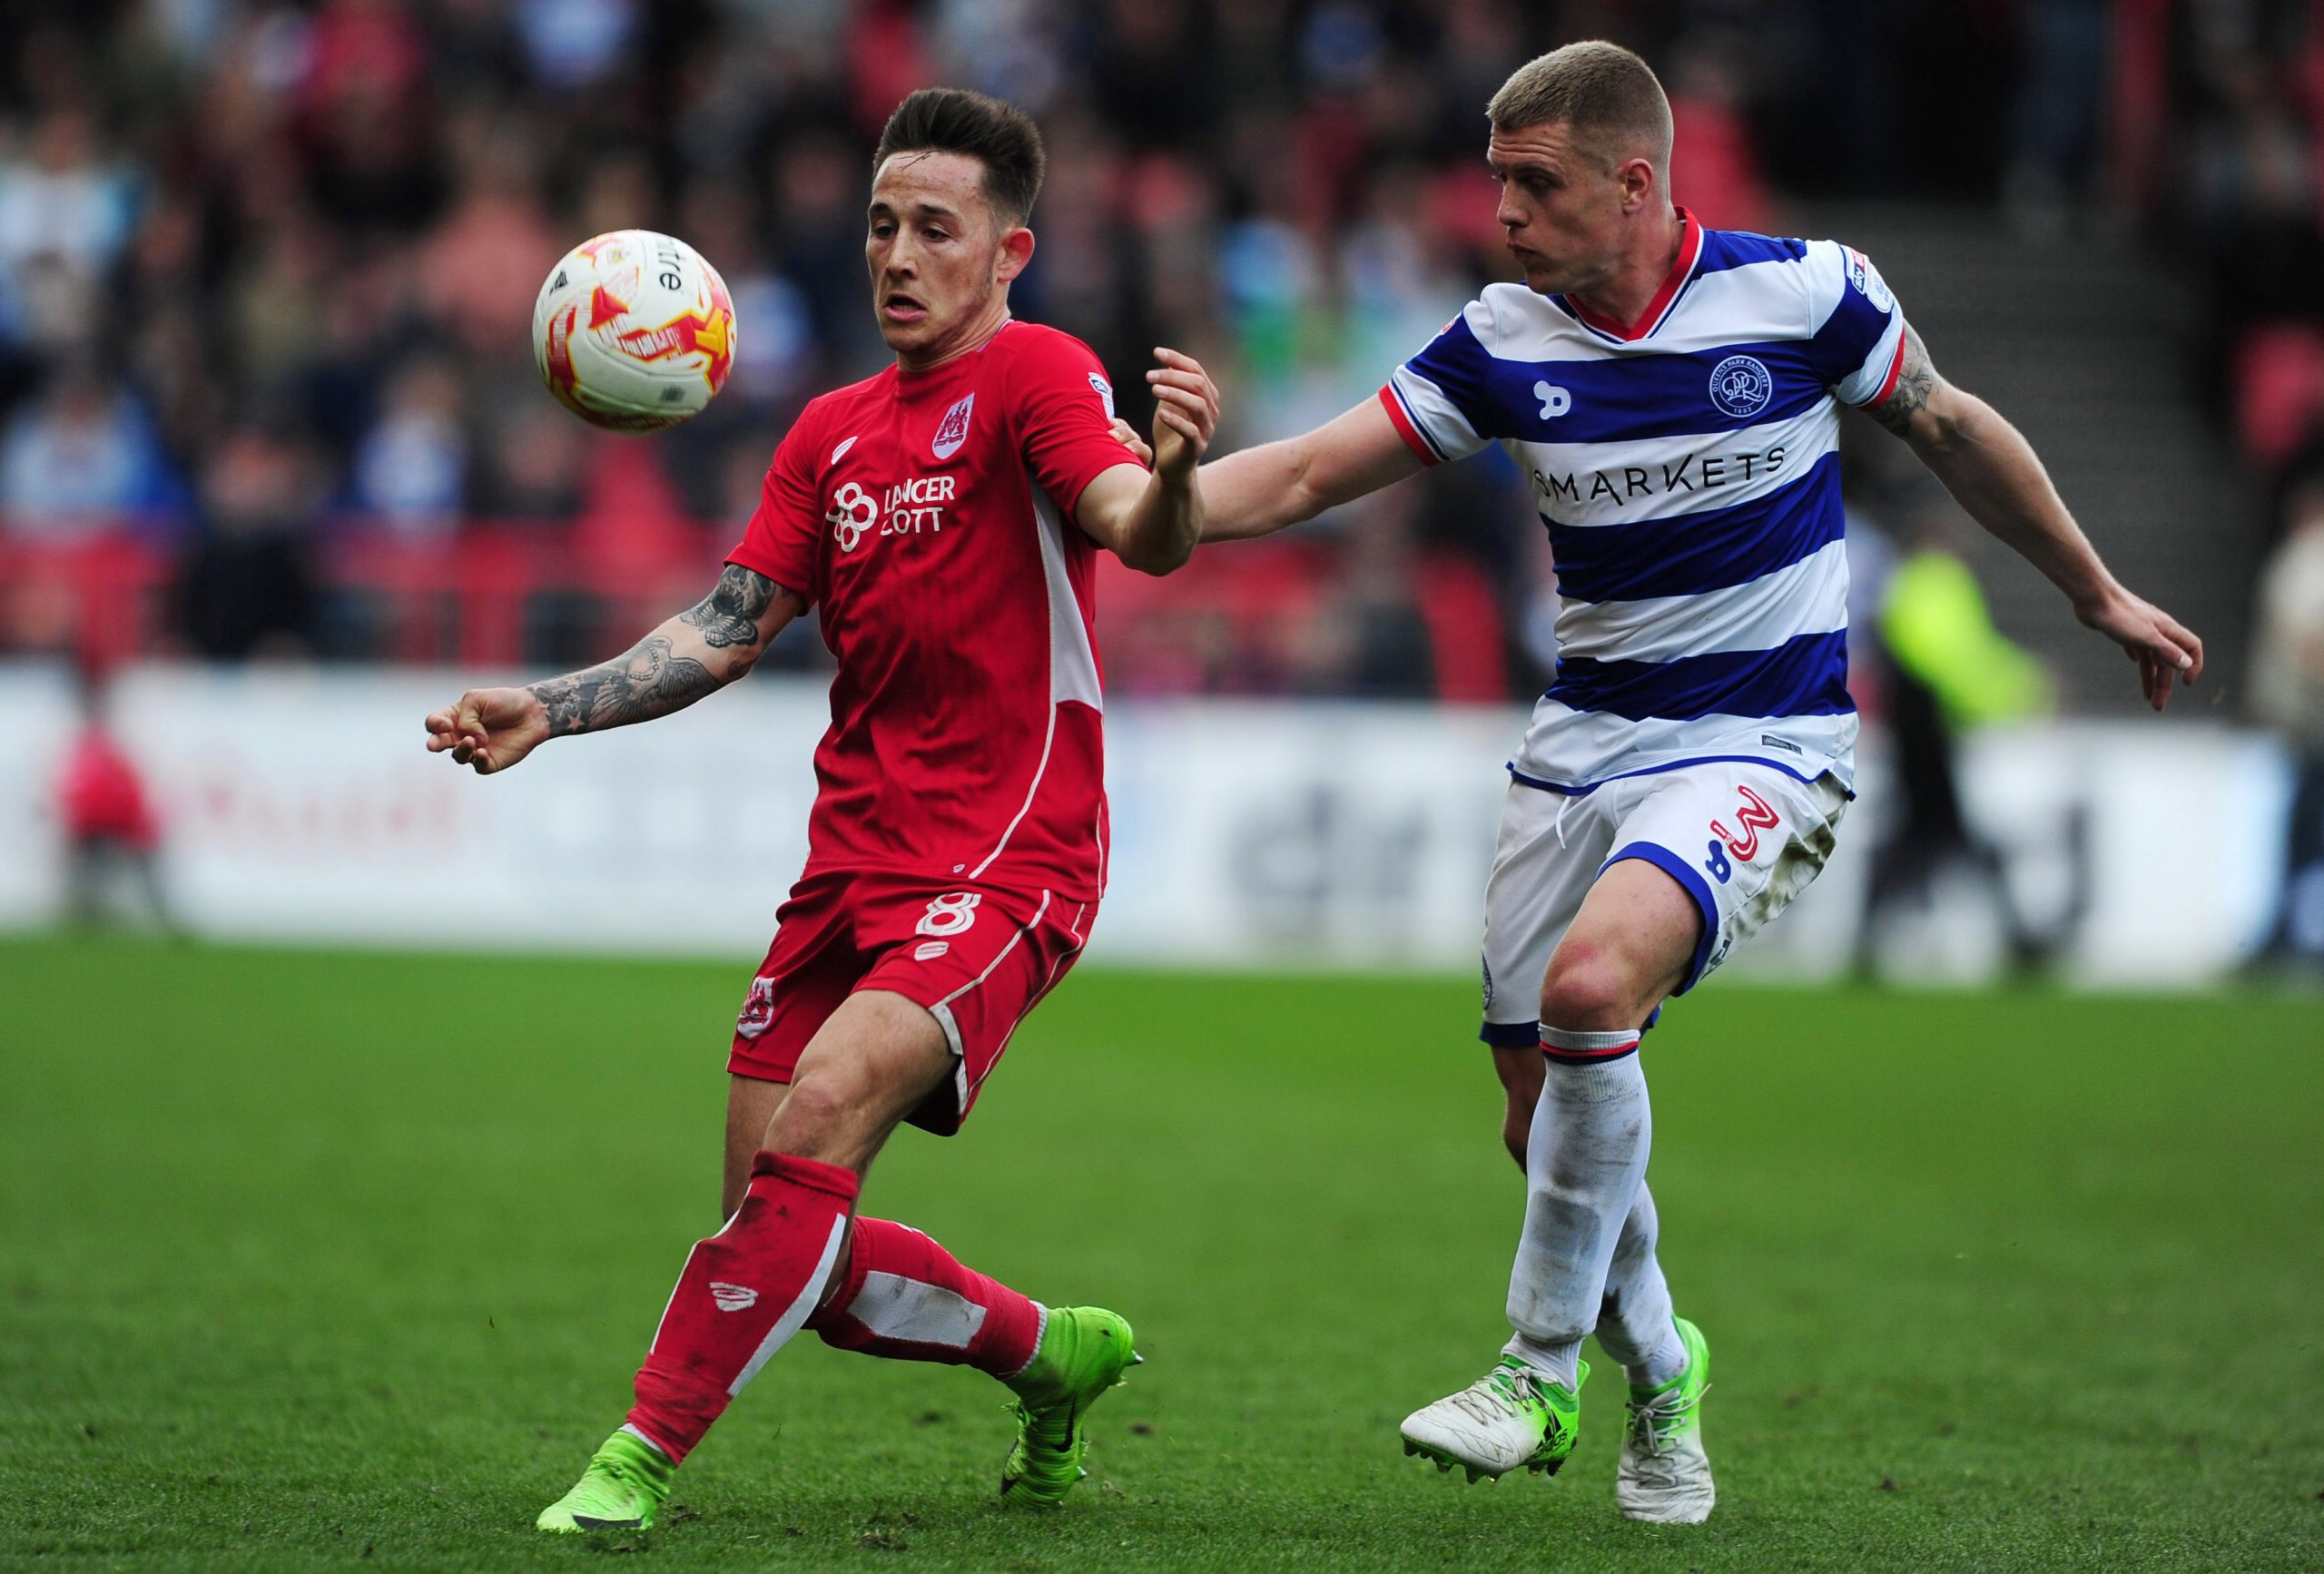 BRISTOL, UNITED KINGDOM - APRIL 14: Josh Brownhill of Bristol City is tackled by Jake Bidwell of Queens Park Rangers during the Sky Bet Championship match between Bristol City and Queens Park Rangers at Ashton Gate on April 14, 2017 in Bristol, England. (Photo by Harry Trump/Getty Images)